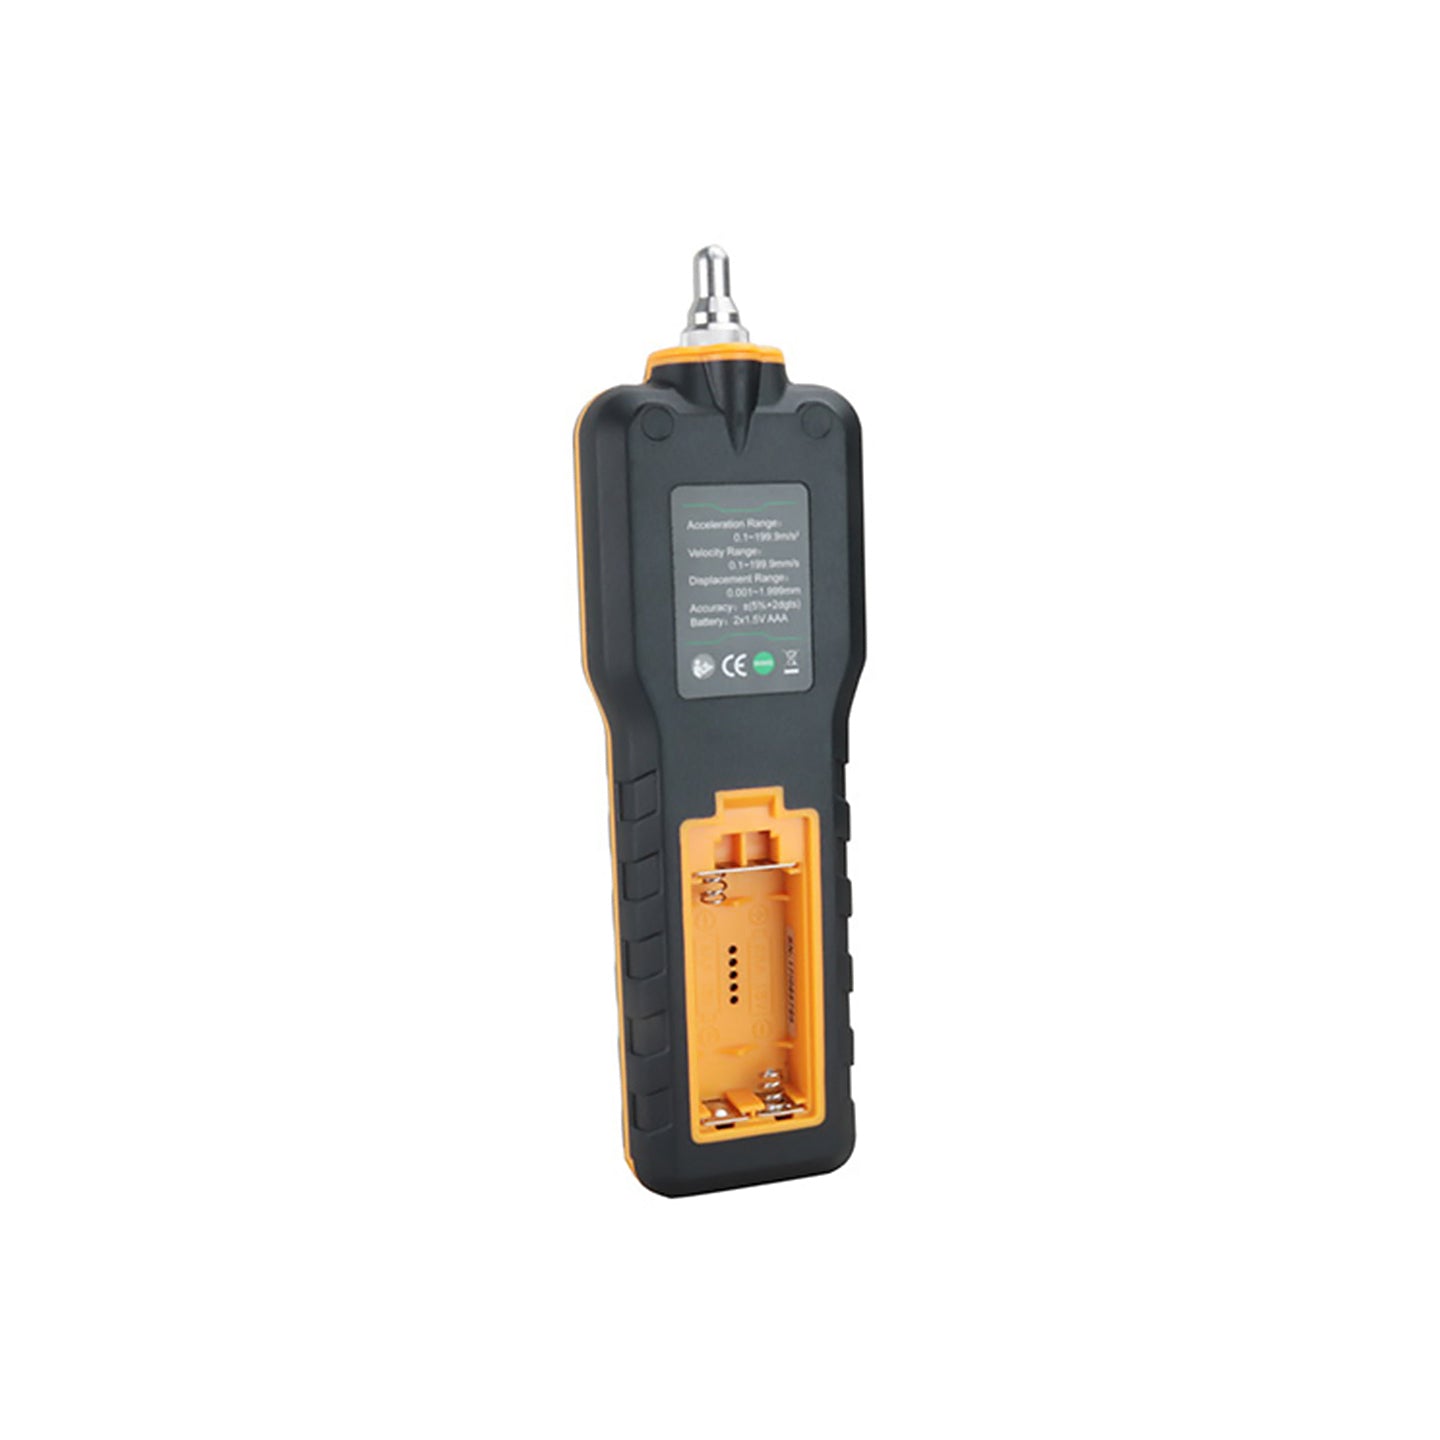 Sndway SW-65A Portable Digital Vibration Meter Tester Measuring Device with LCD Display, Flashlight, Data Storage Key, Shut Down/Back Button